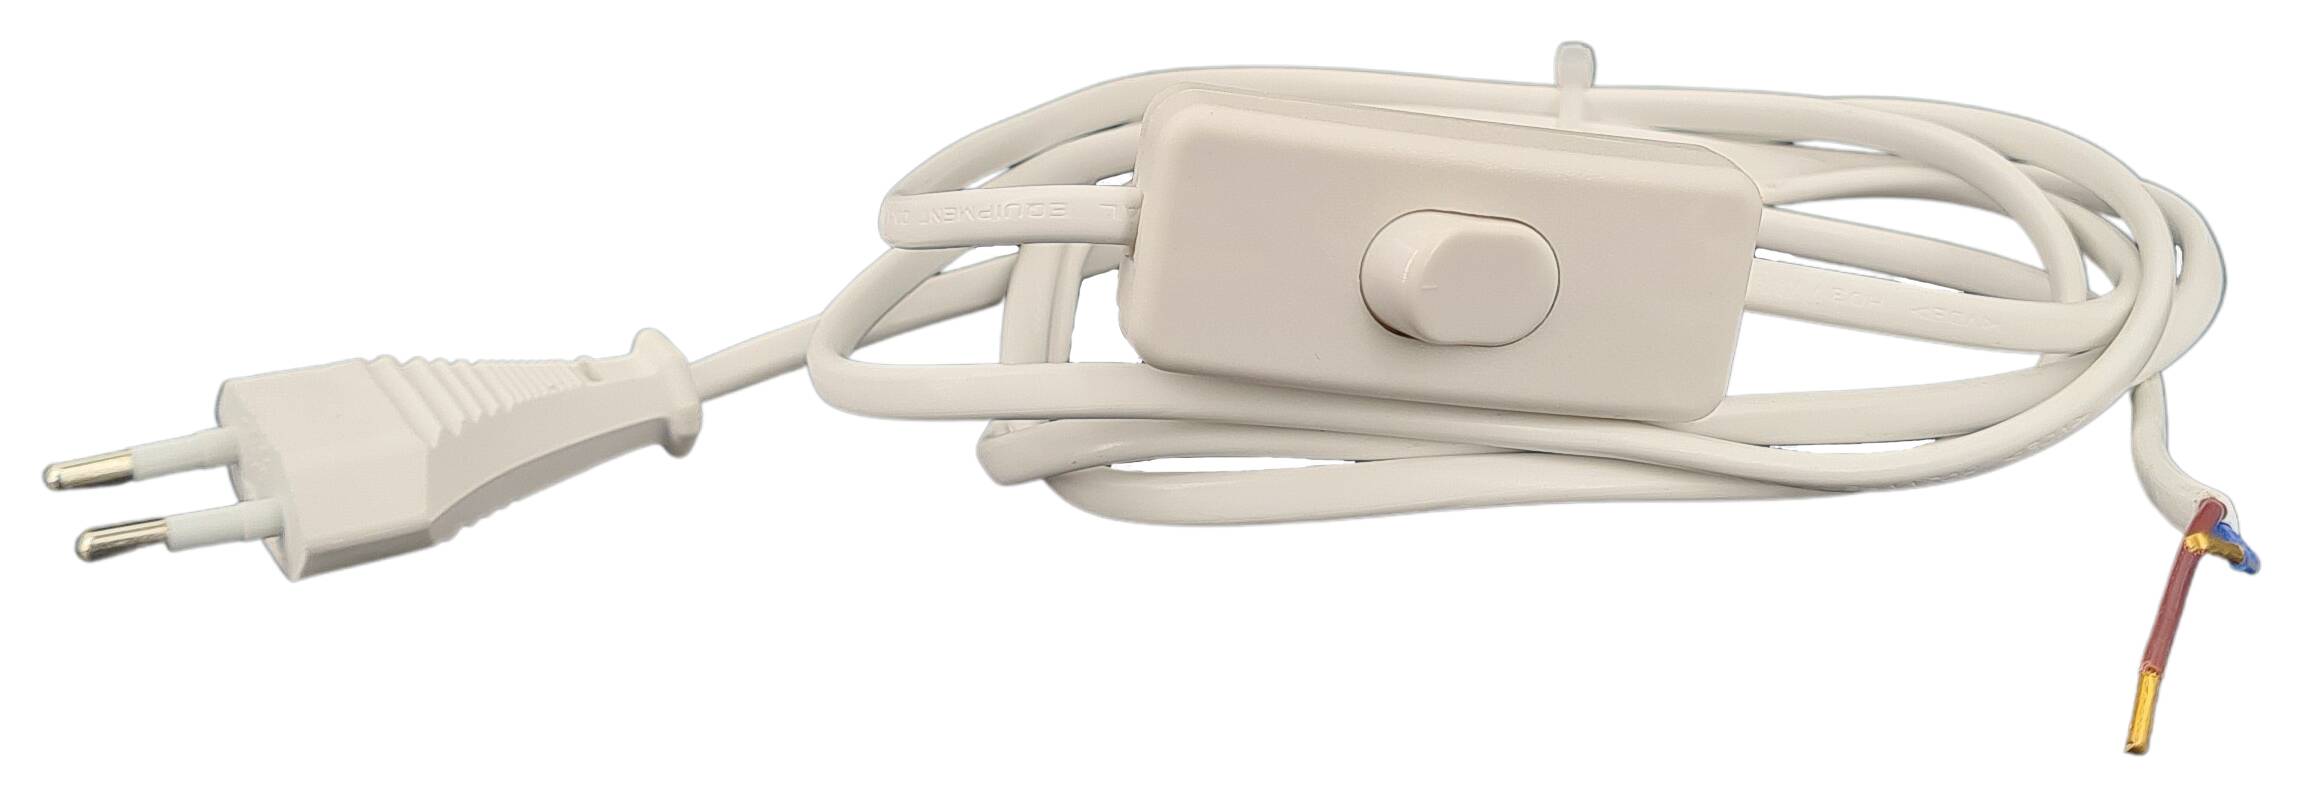 cord-set 2x0,75/2000/800 flat with Euro plug and handswitch white